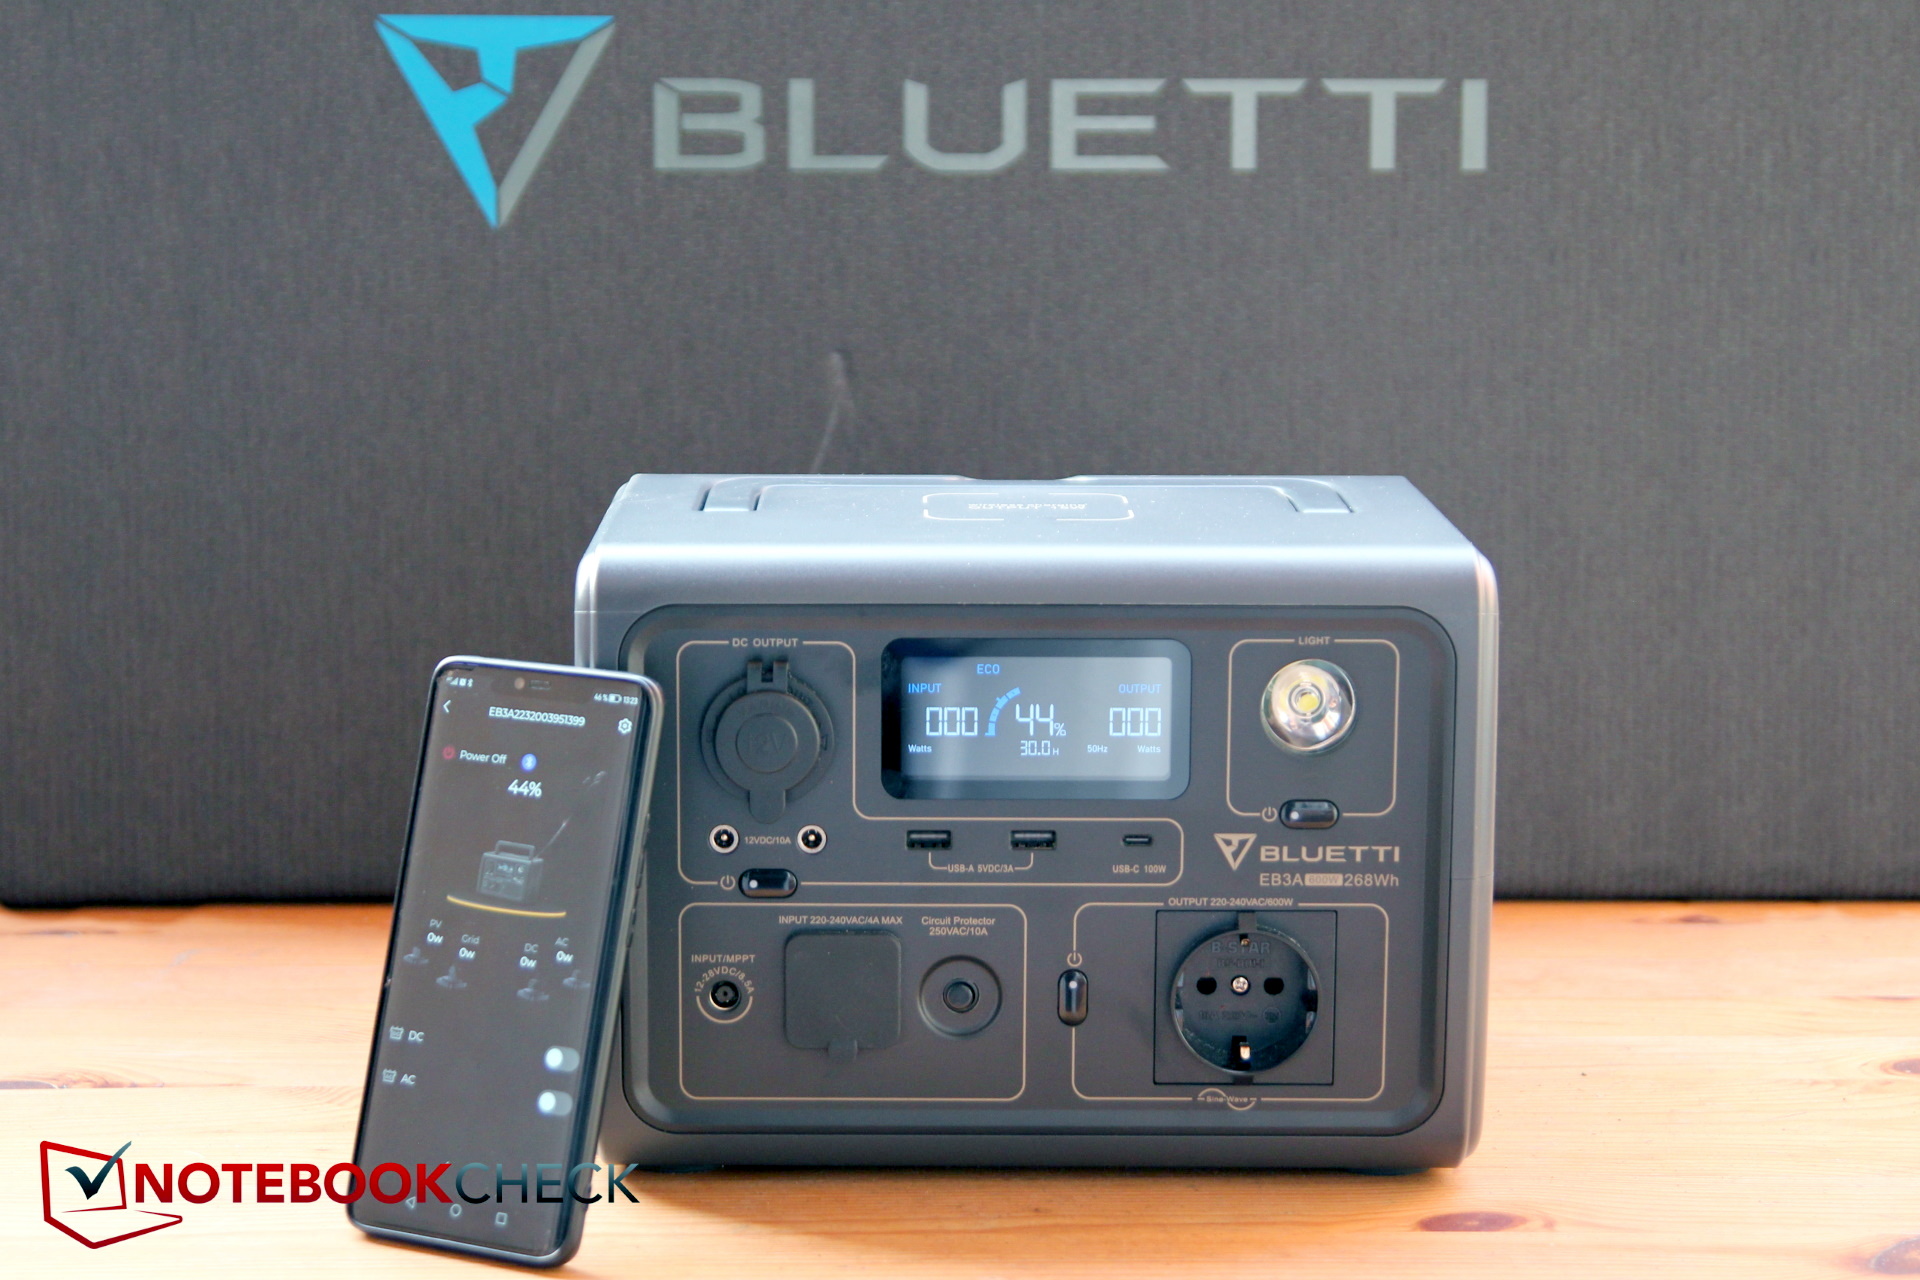 Bluetti EB3A power station with 200W solar panel hands-on test: A